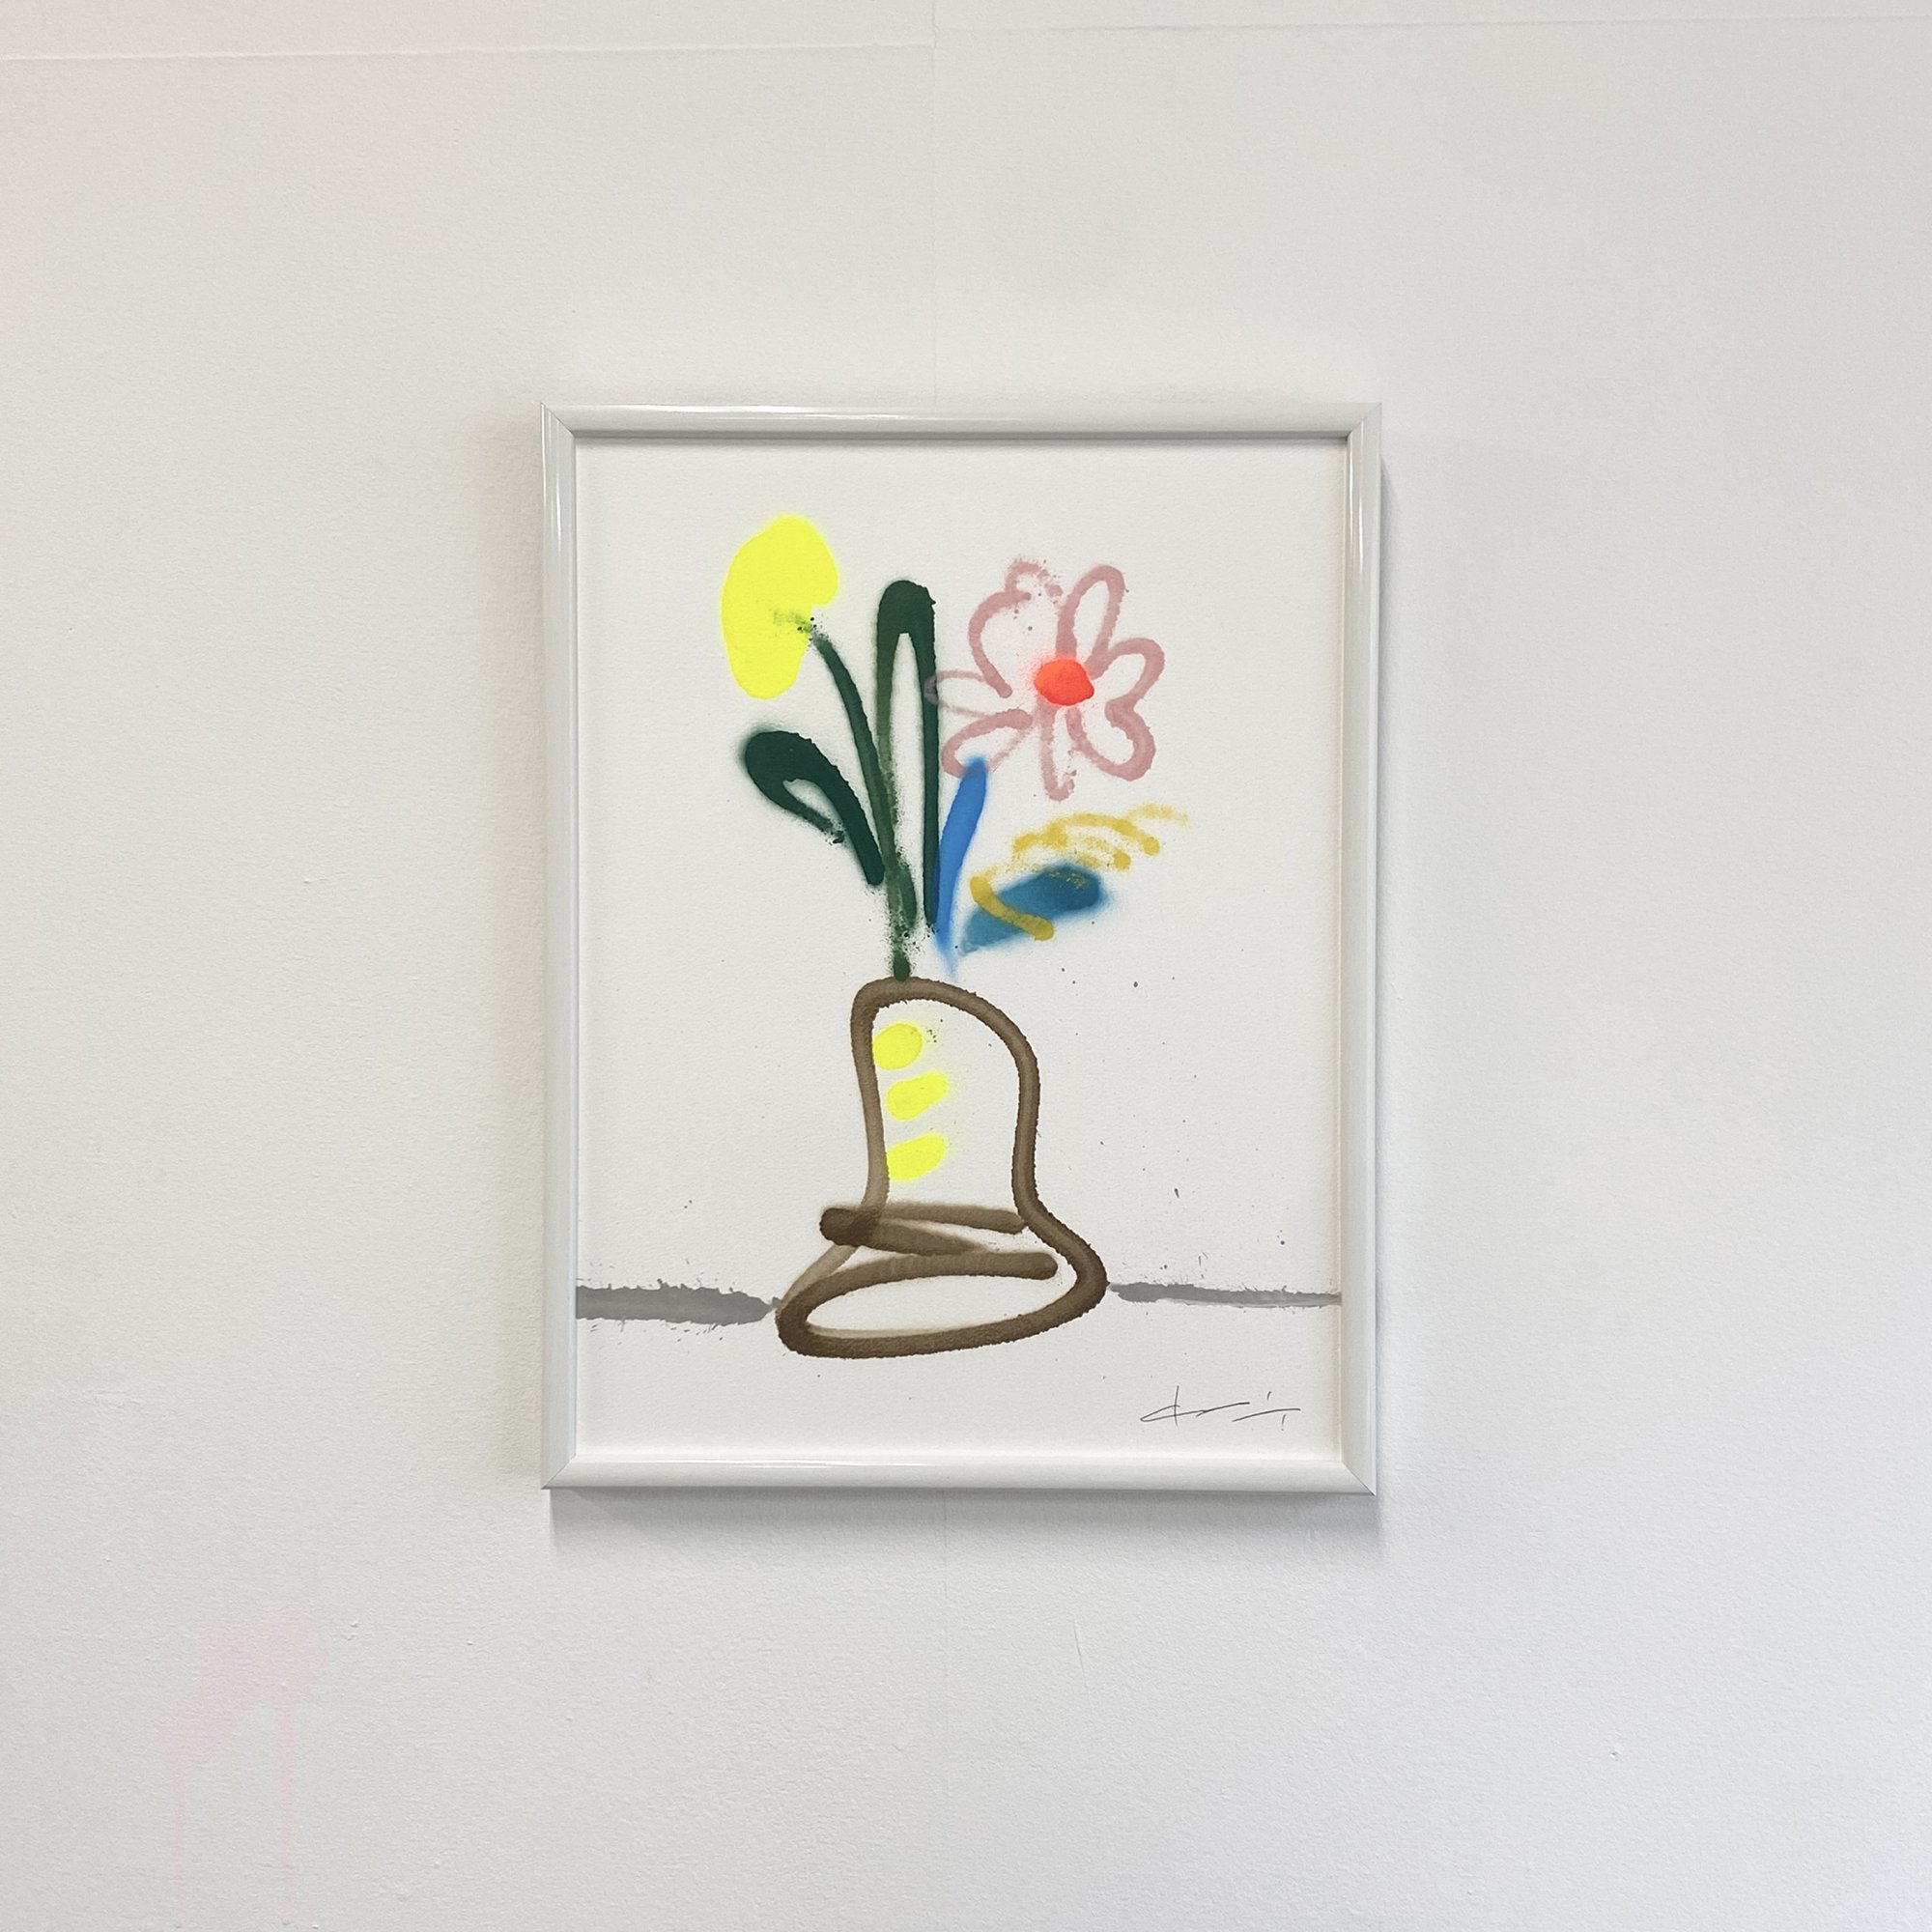 kurry > The only flower in the world -今は仲良し- - ART SHOP